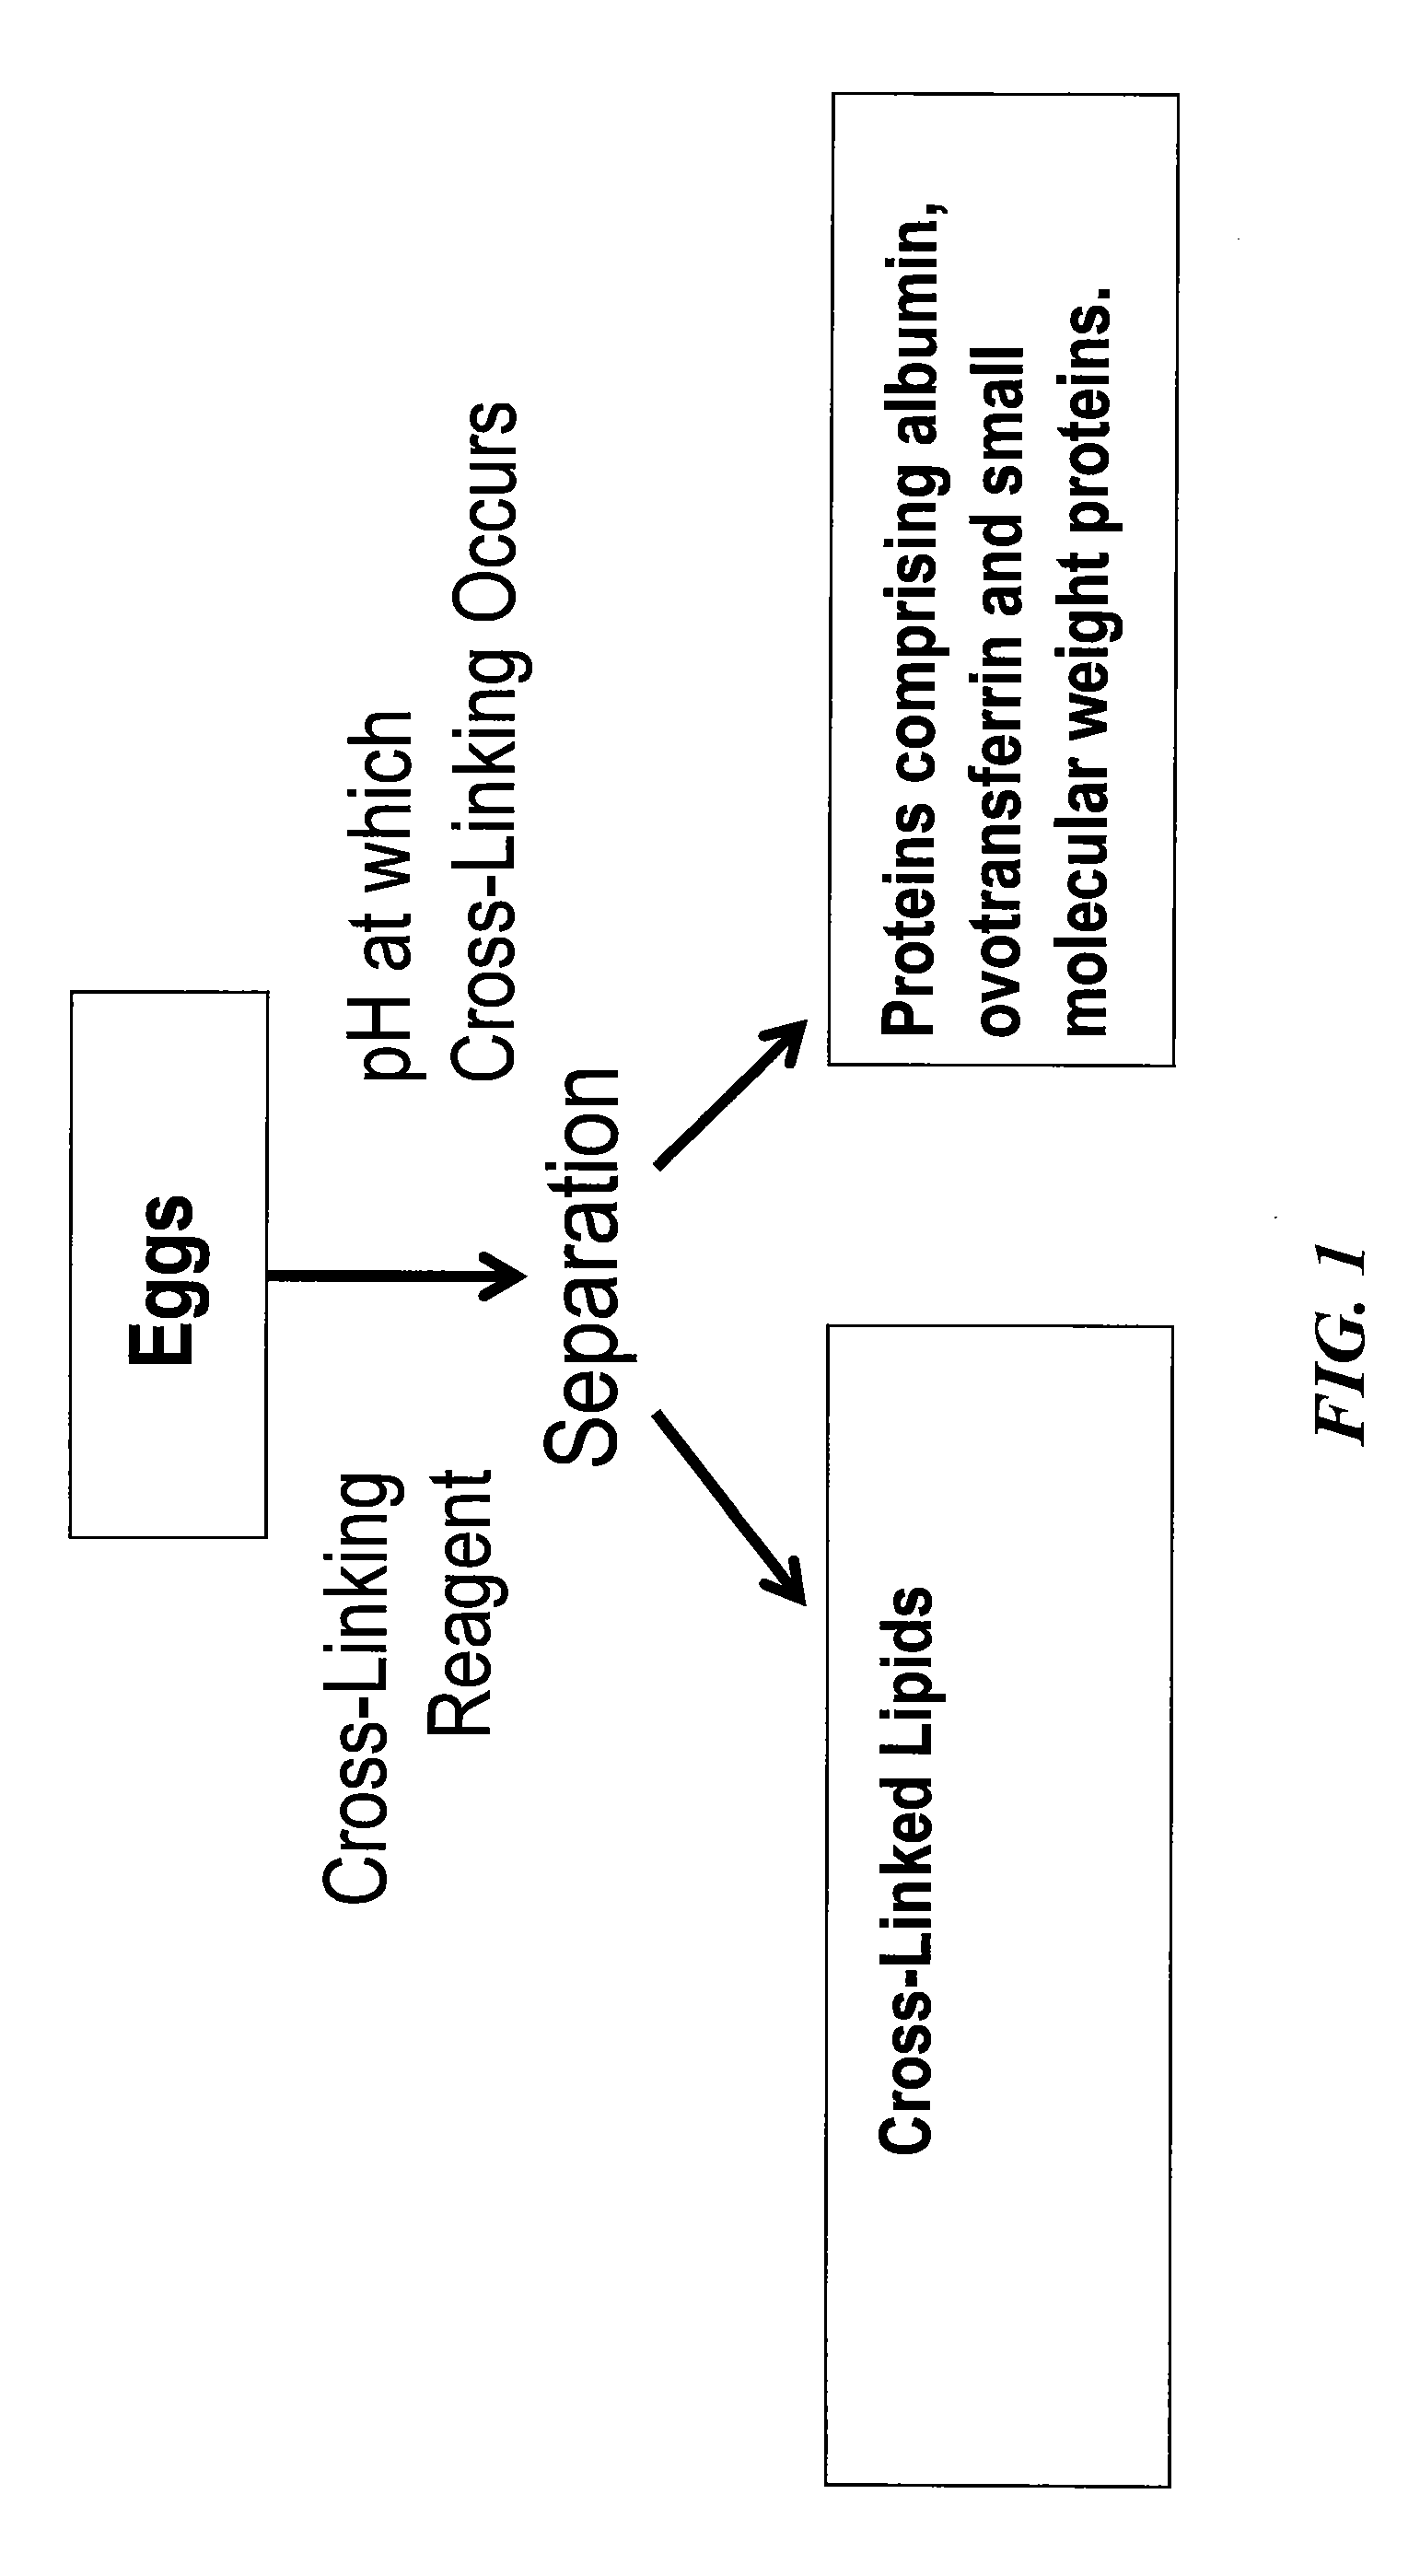 Method of separating components of technical eggs, edible eggs, yolk and whites and products therefrom